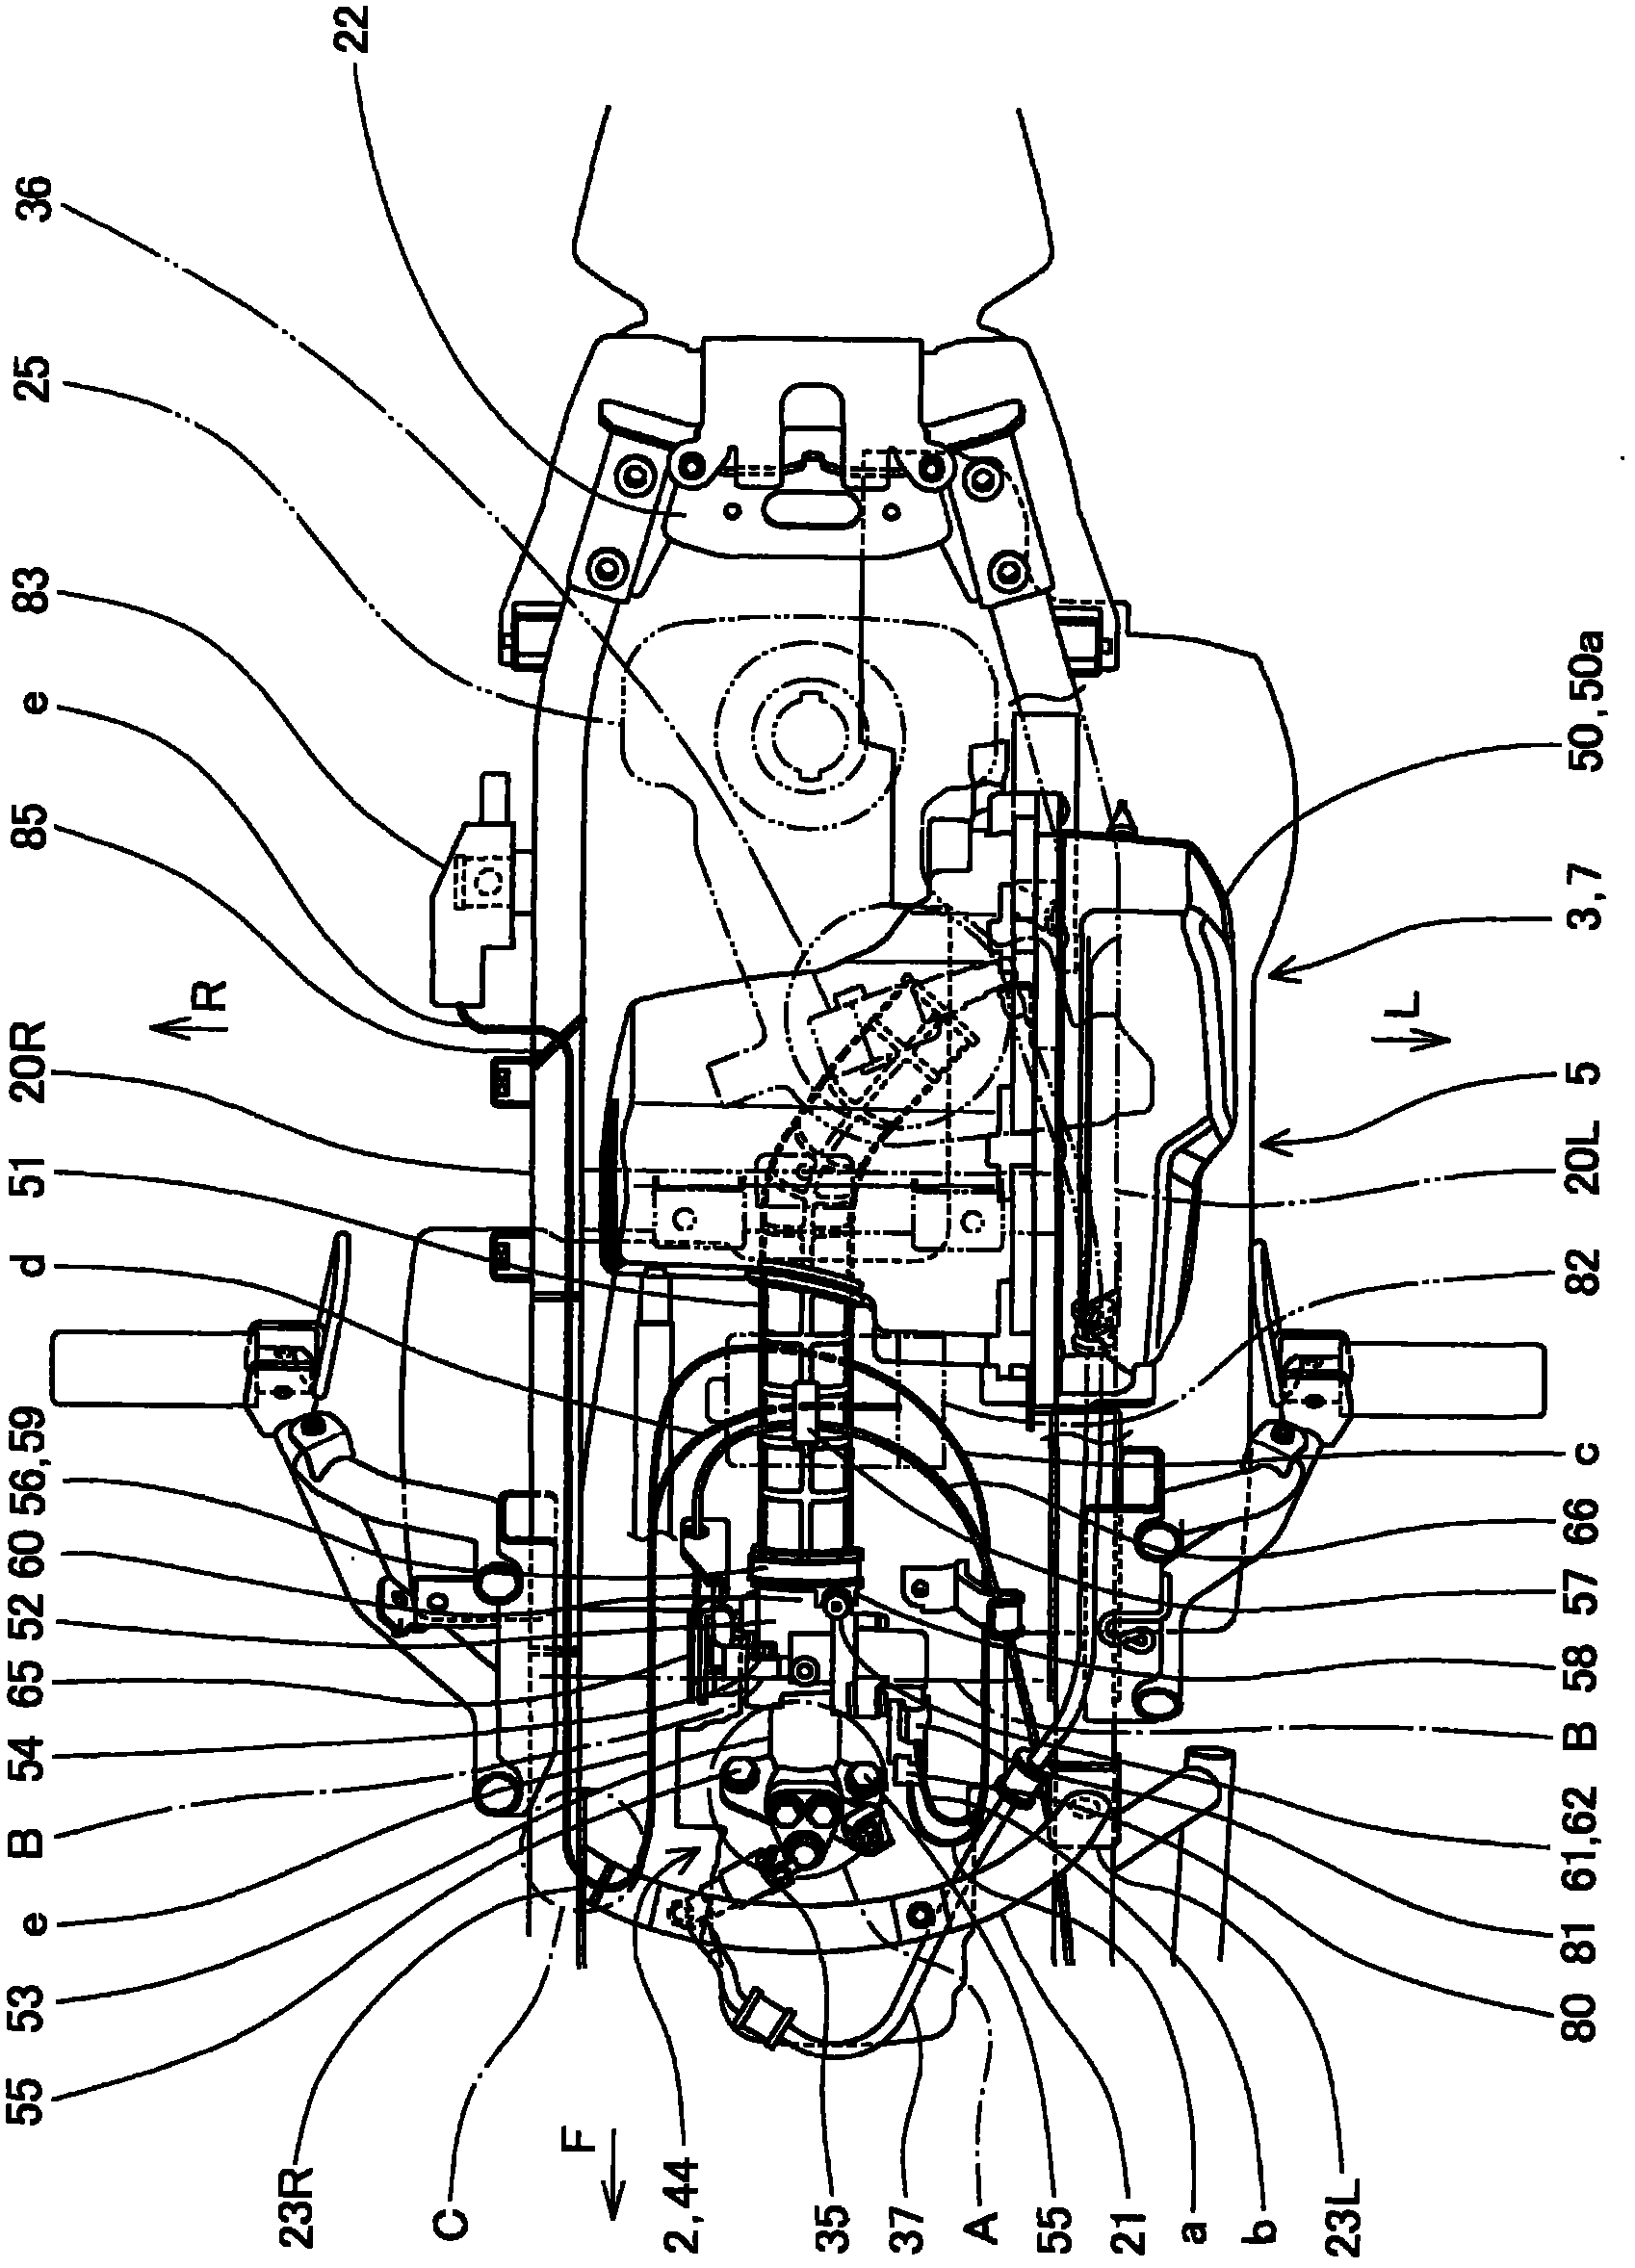 Wiring configuration for throttle body in small vehicle